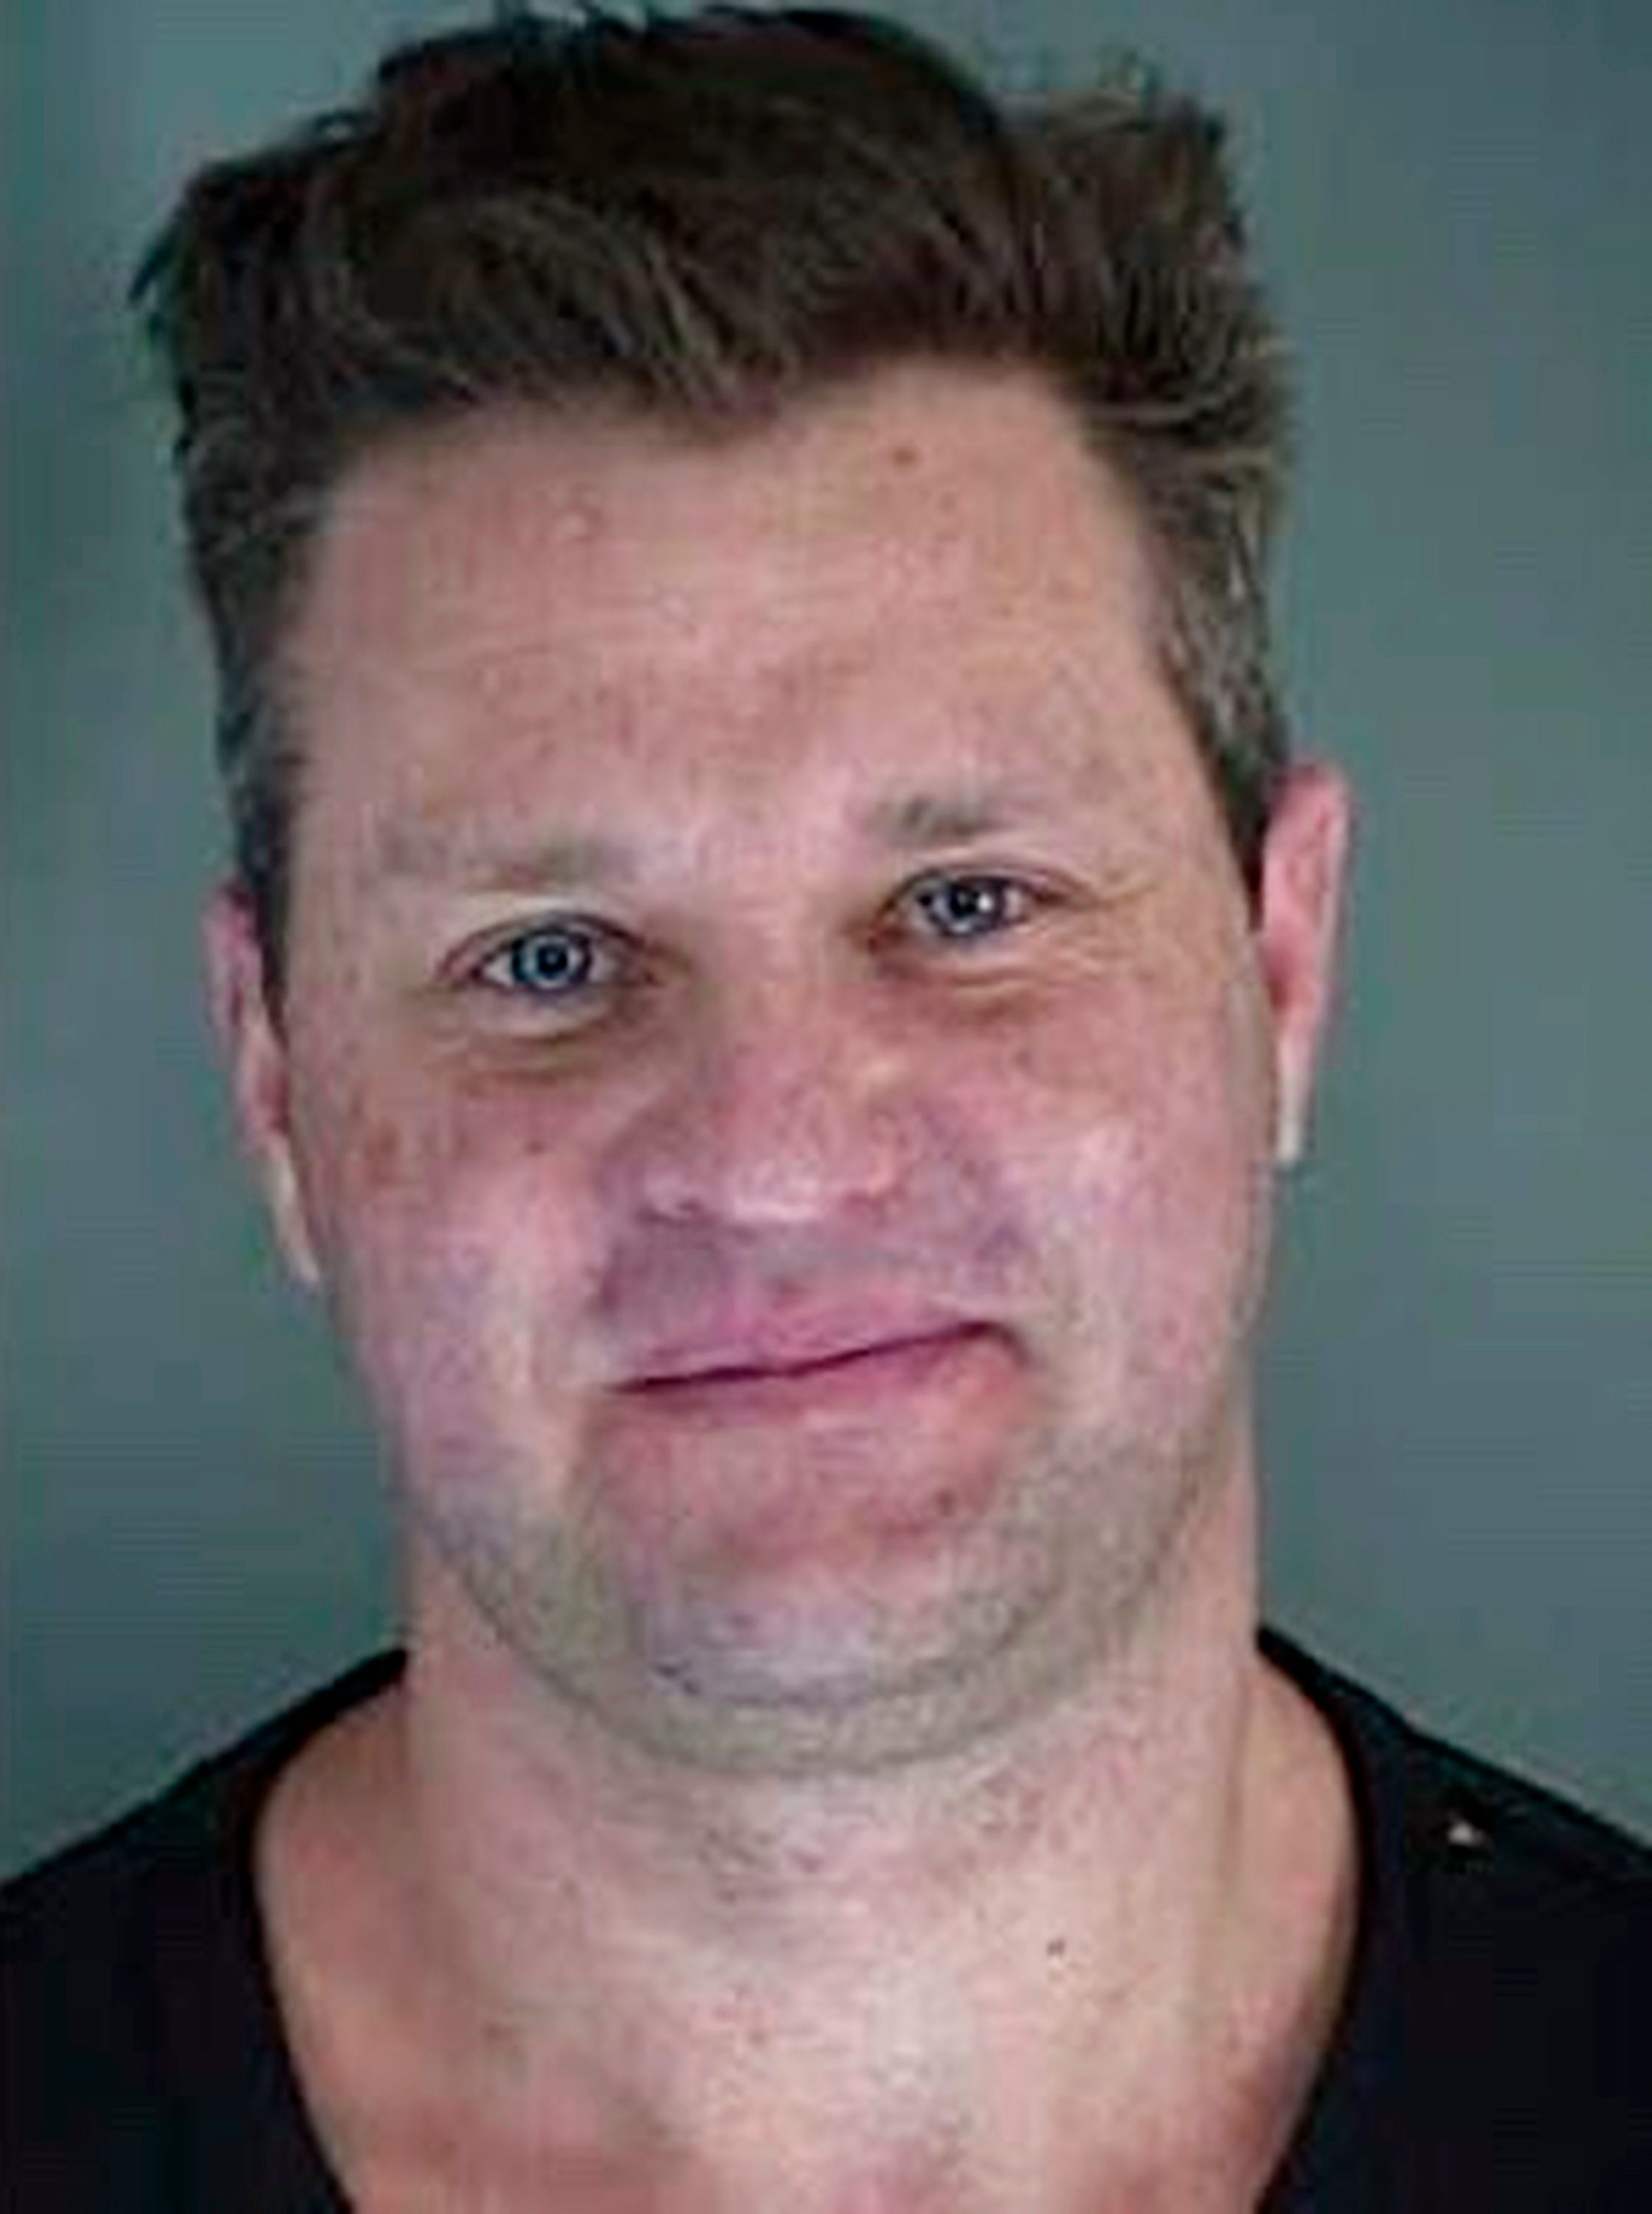 Zachery Ty Bryan of 'Home Improvement' arrested for alleged assault